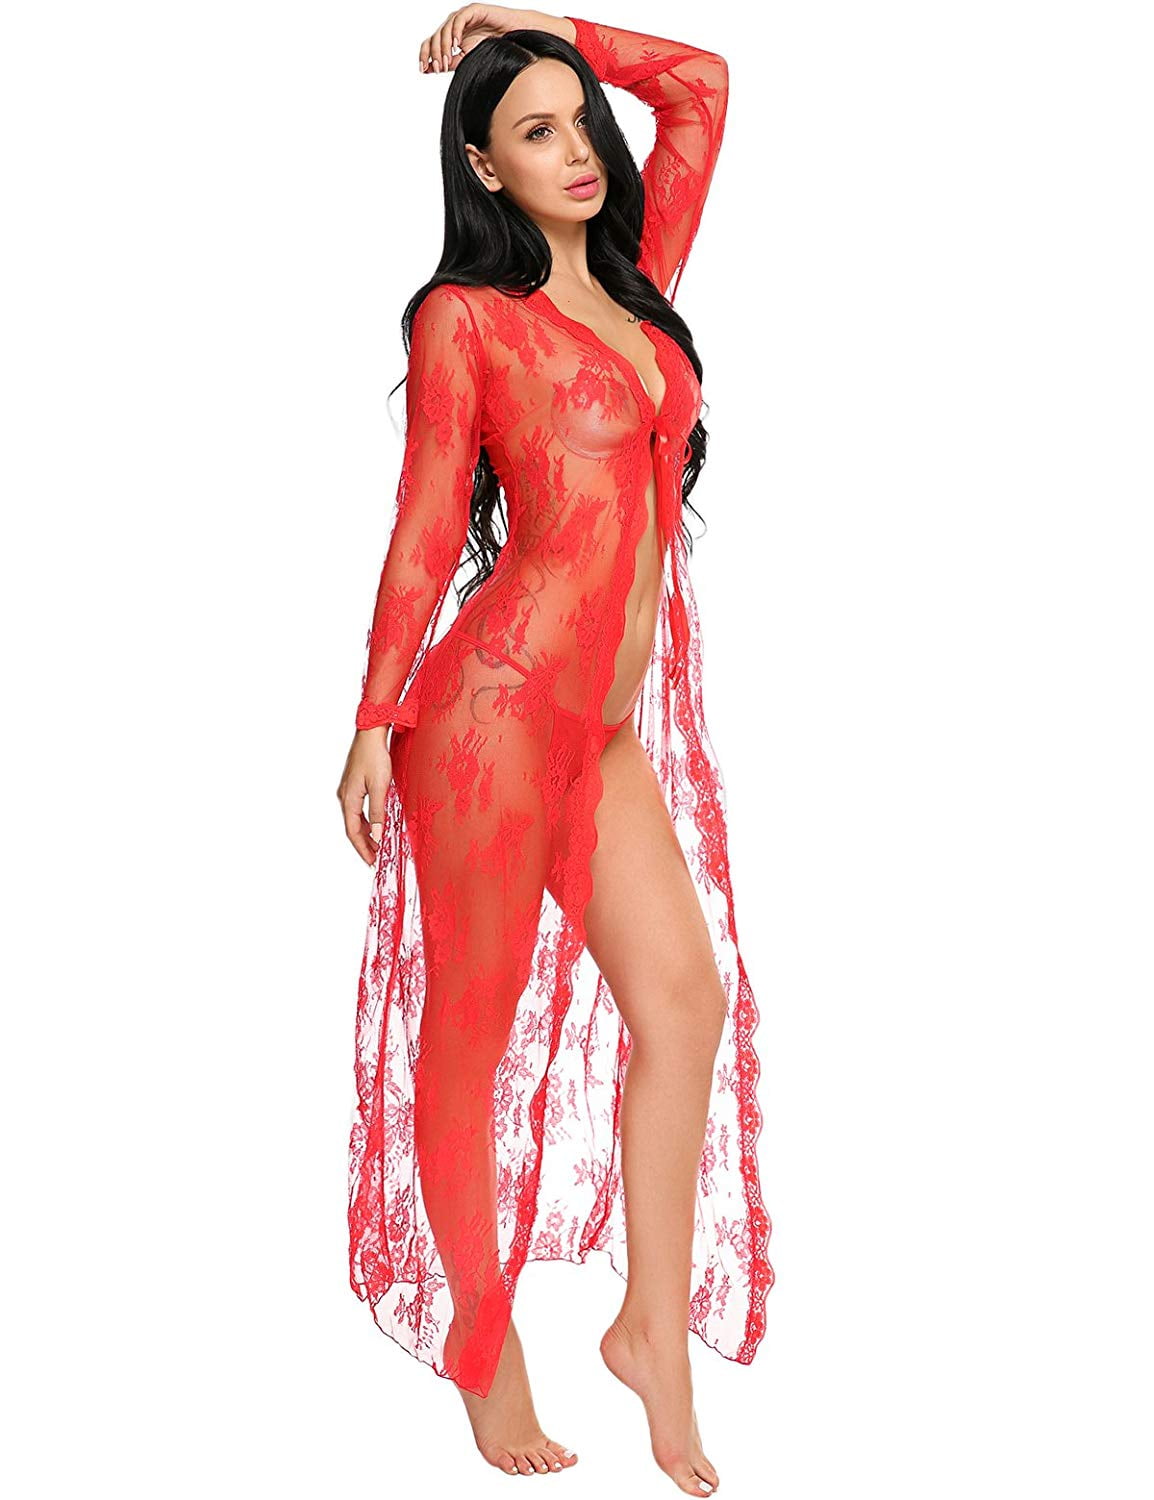 Reactionnx Lingerie for Women Sexy Long Lace Dress Sheer Gown See Through Kimono Robe photo